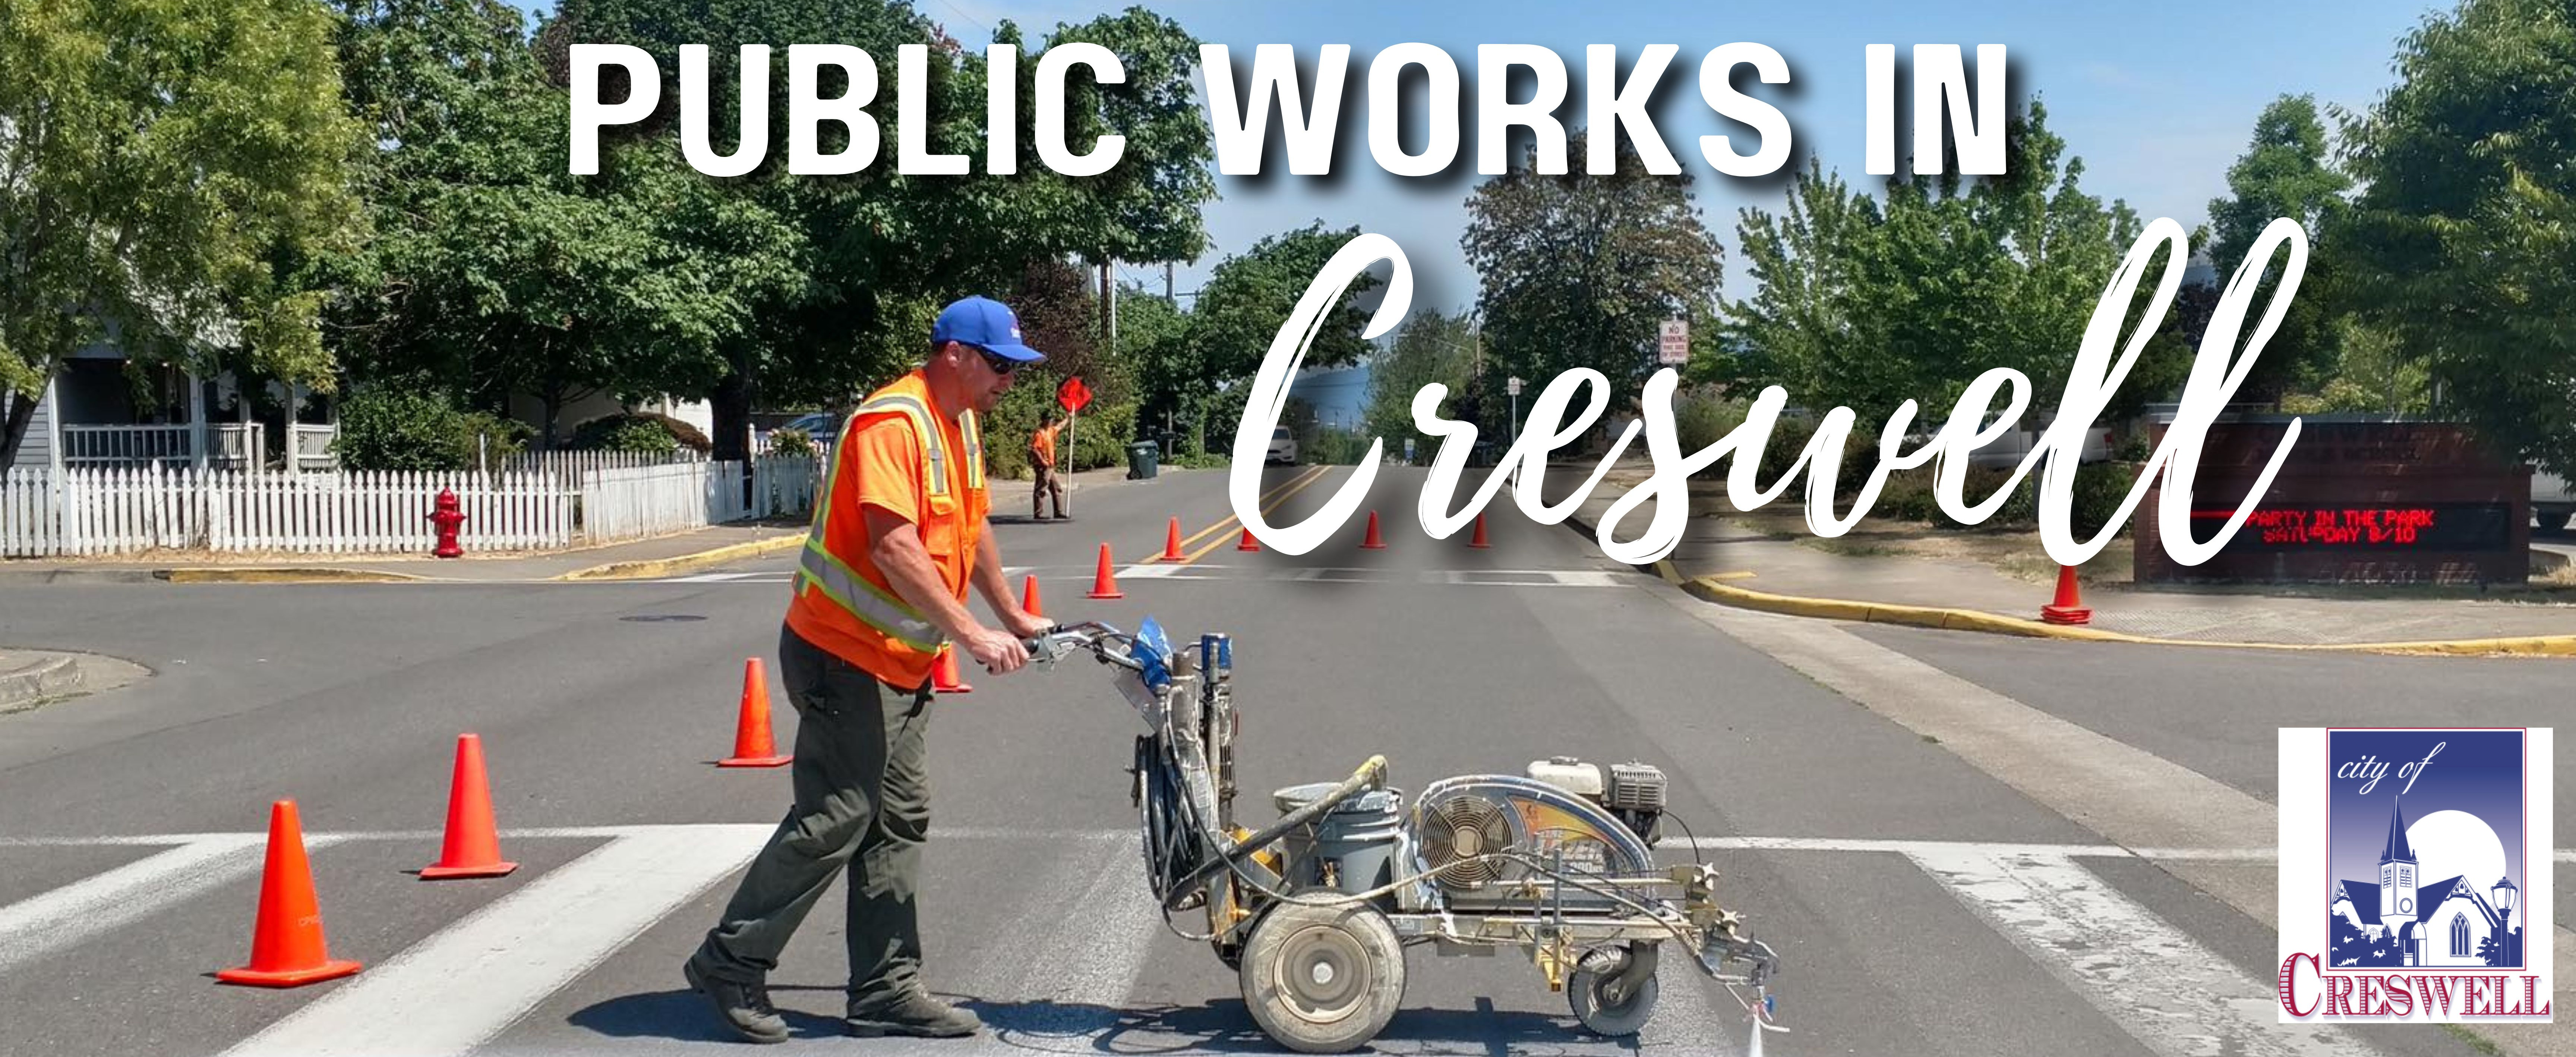 Public Works in Creswell